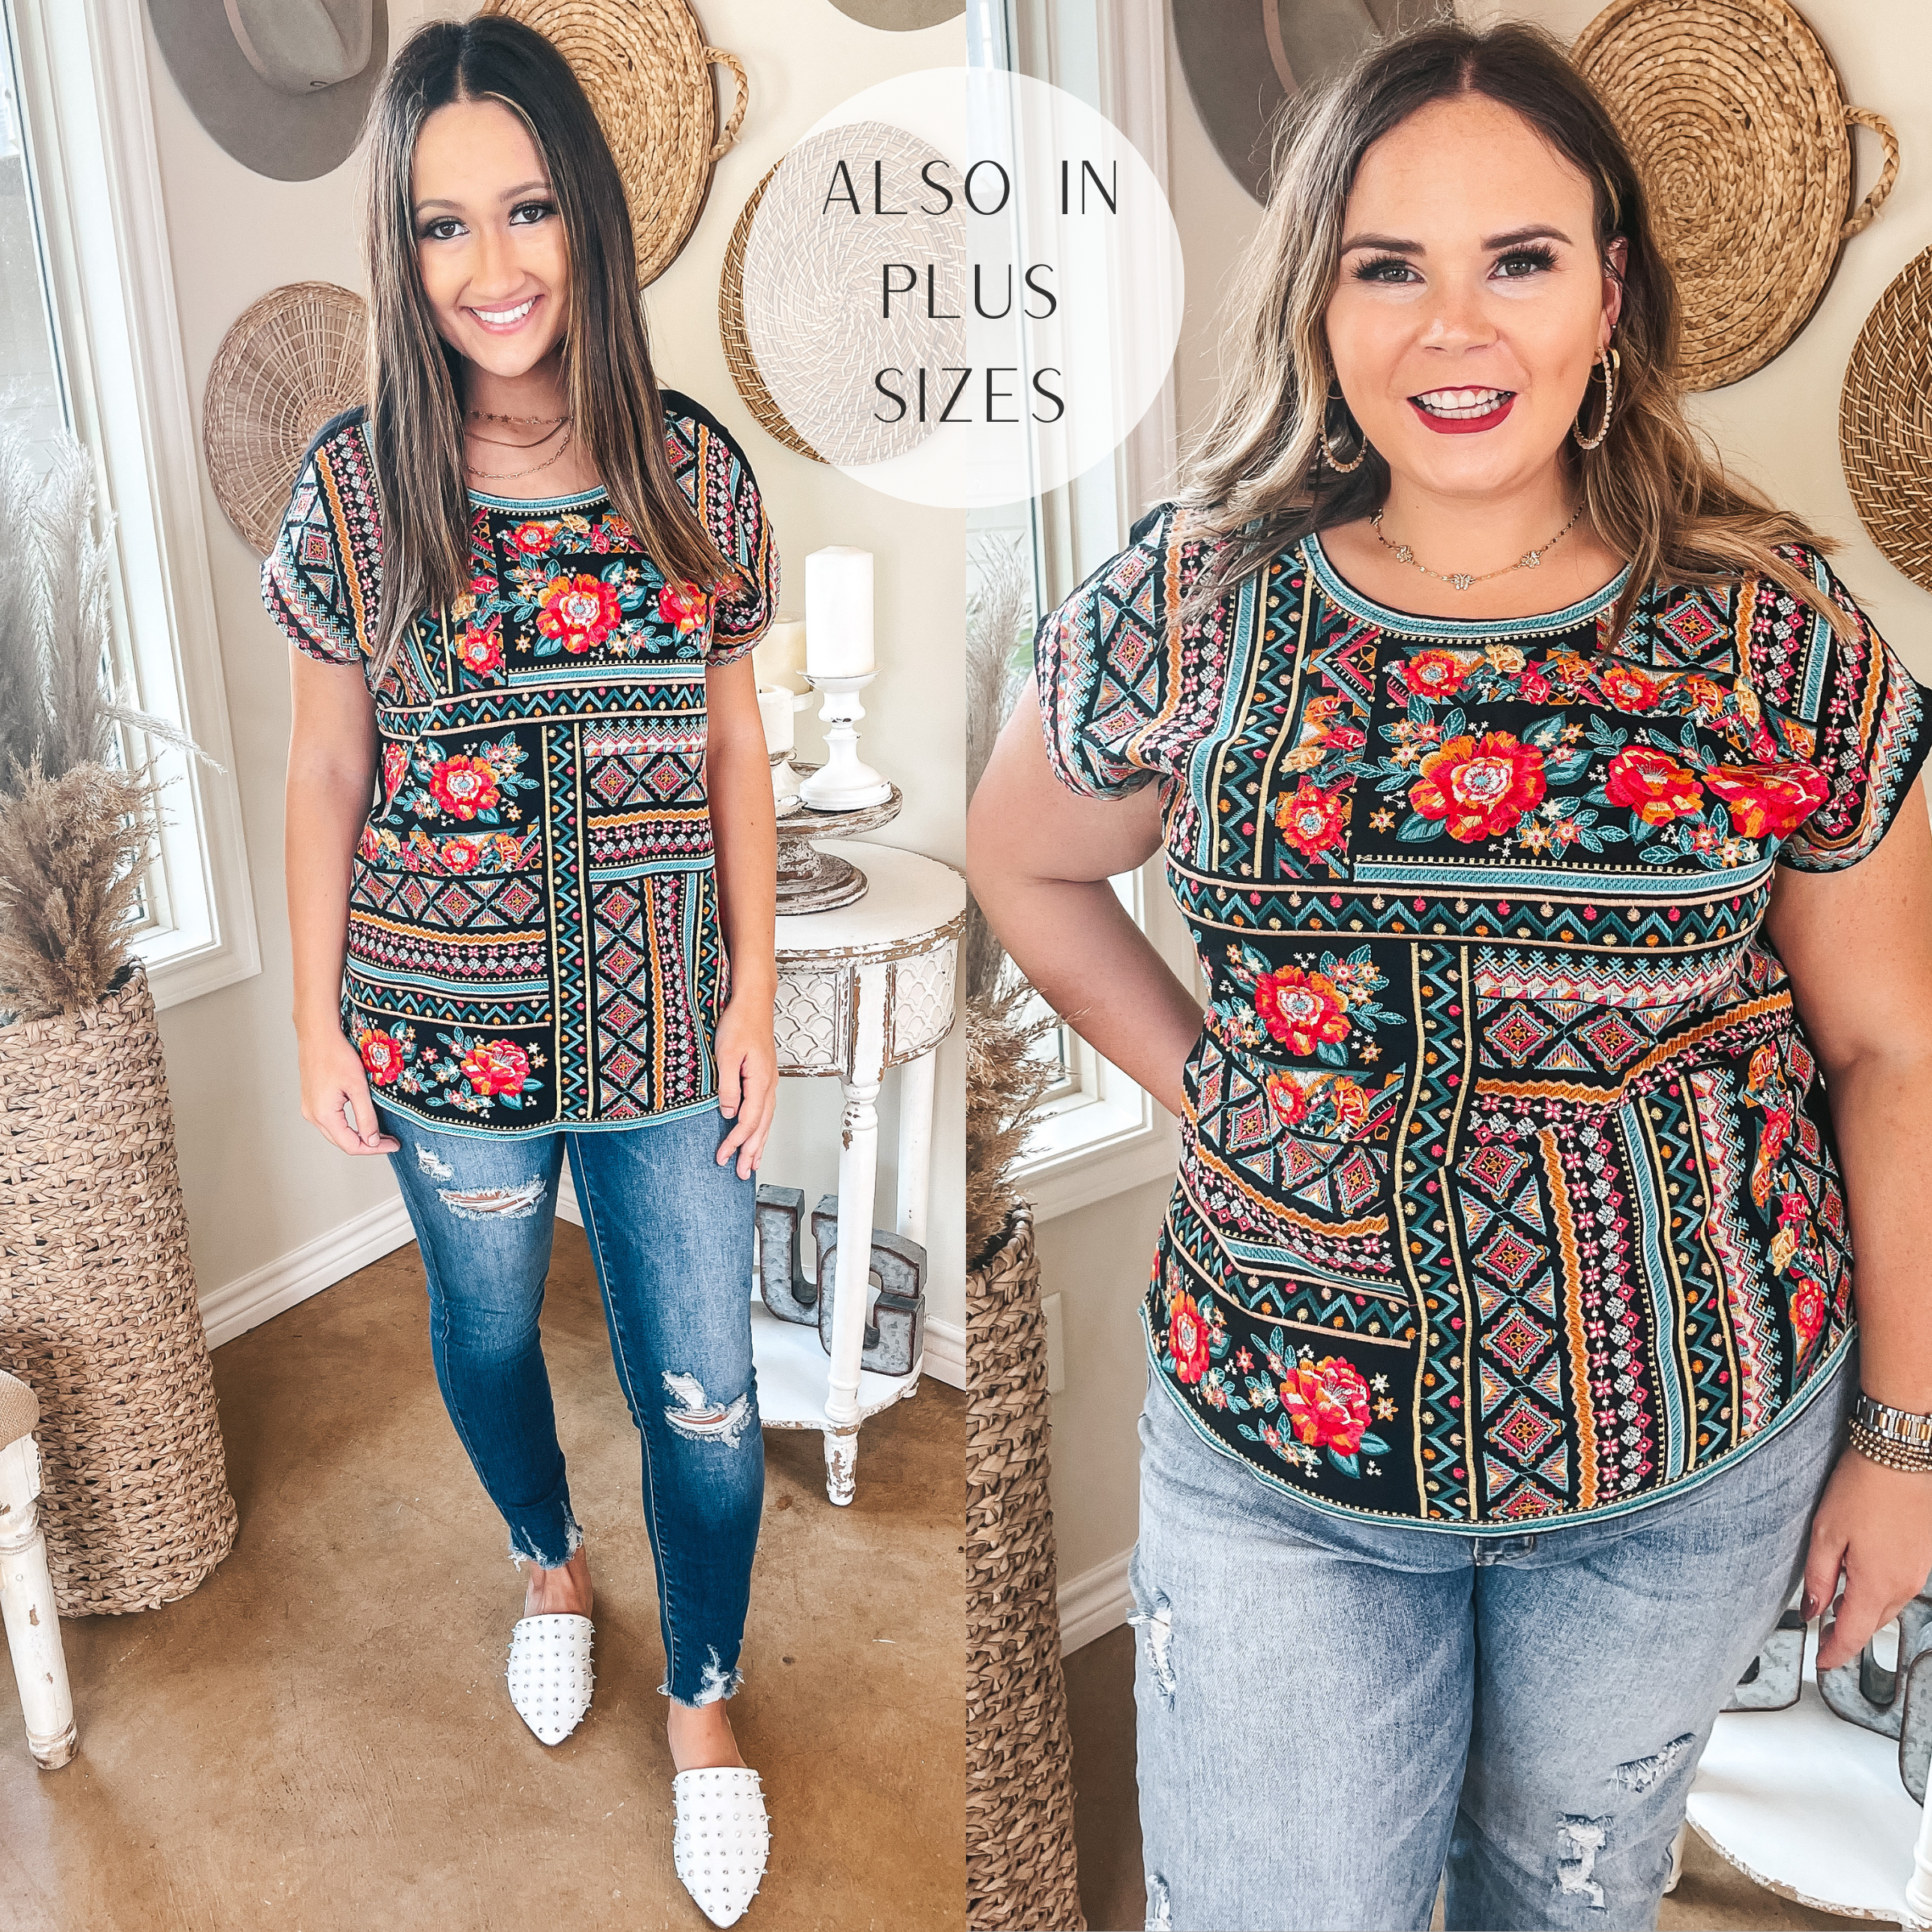 Sonoma Valley Bright Embroidered Short Sleeve Top in Black - Giddy Up Glamour Boutique